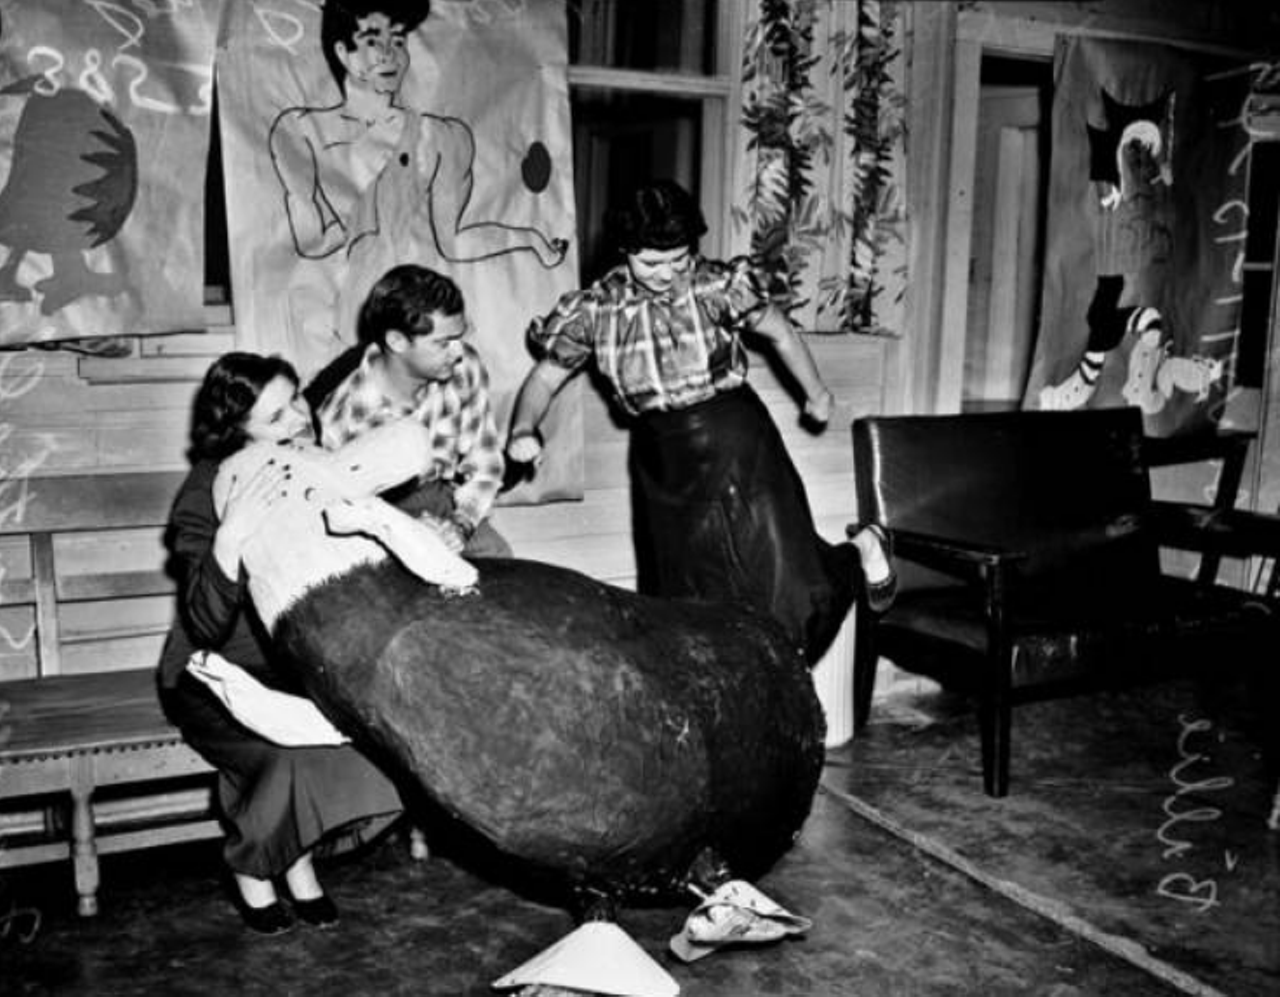 Trinity University kept its cool status by holding special events, like this kigmy dance party back in 1949.